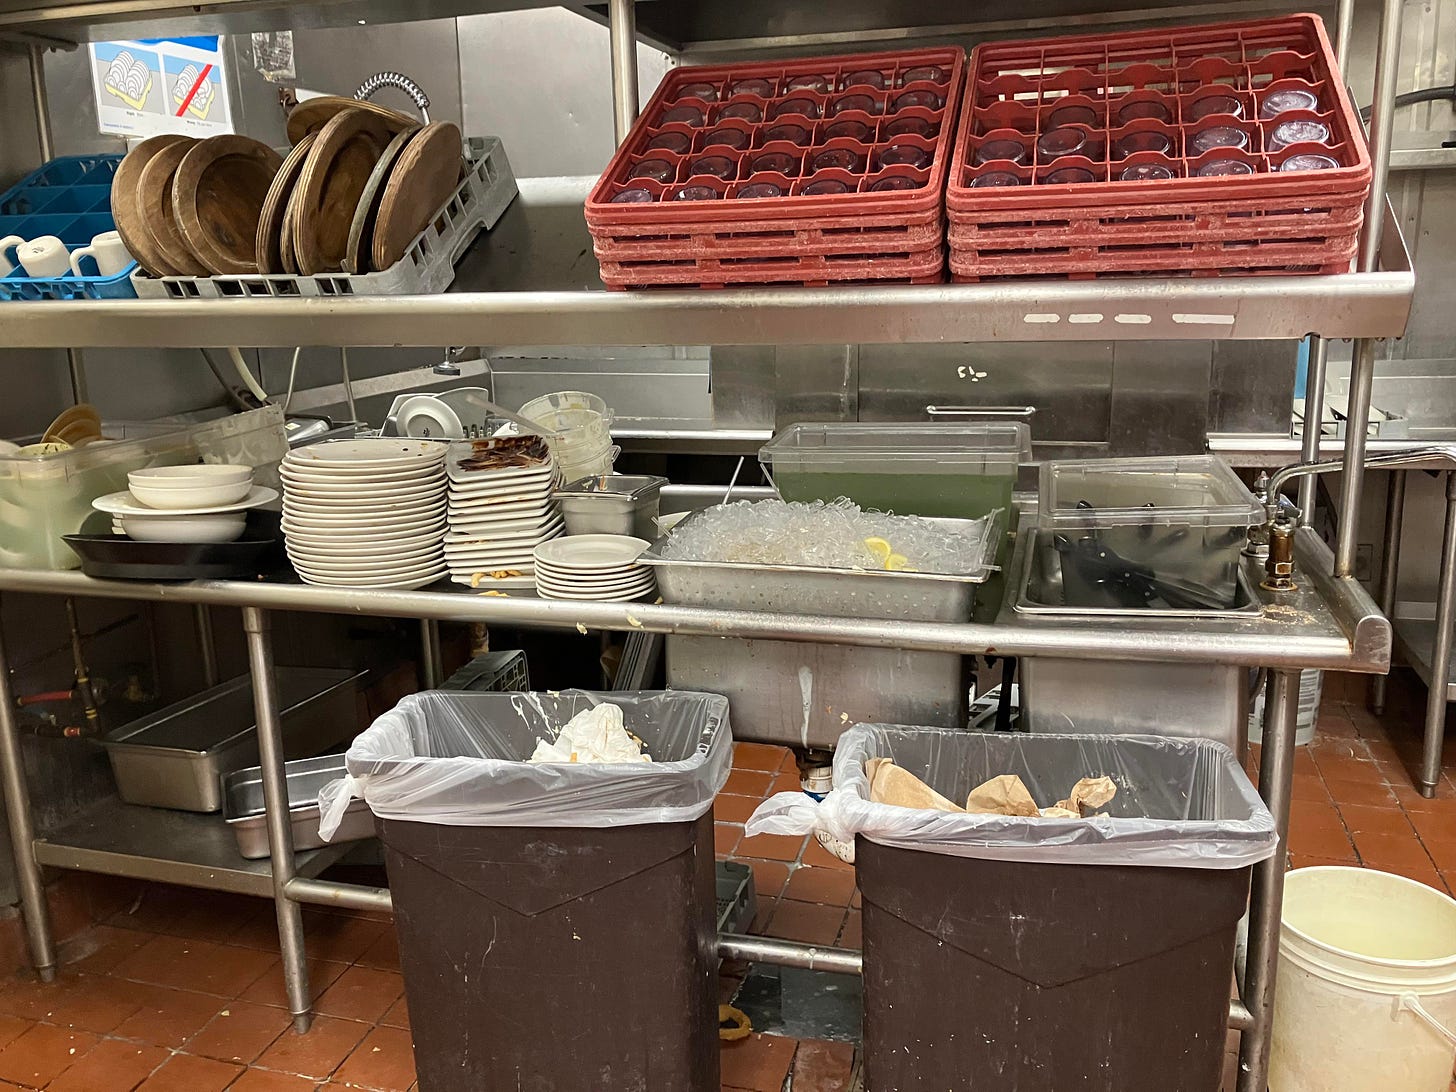 Dirty dishes and garbage piled up in a commercial kitchen